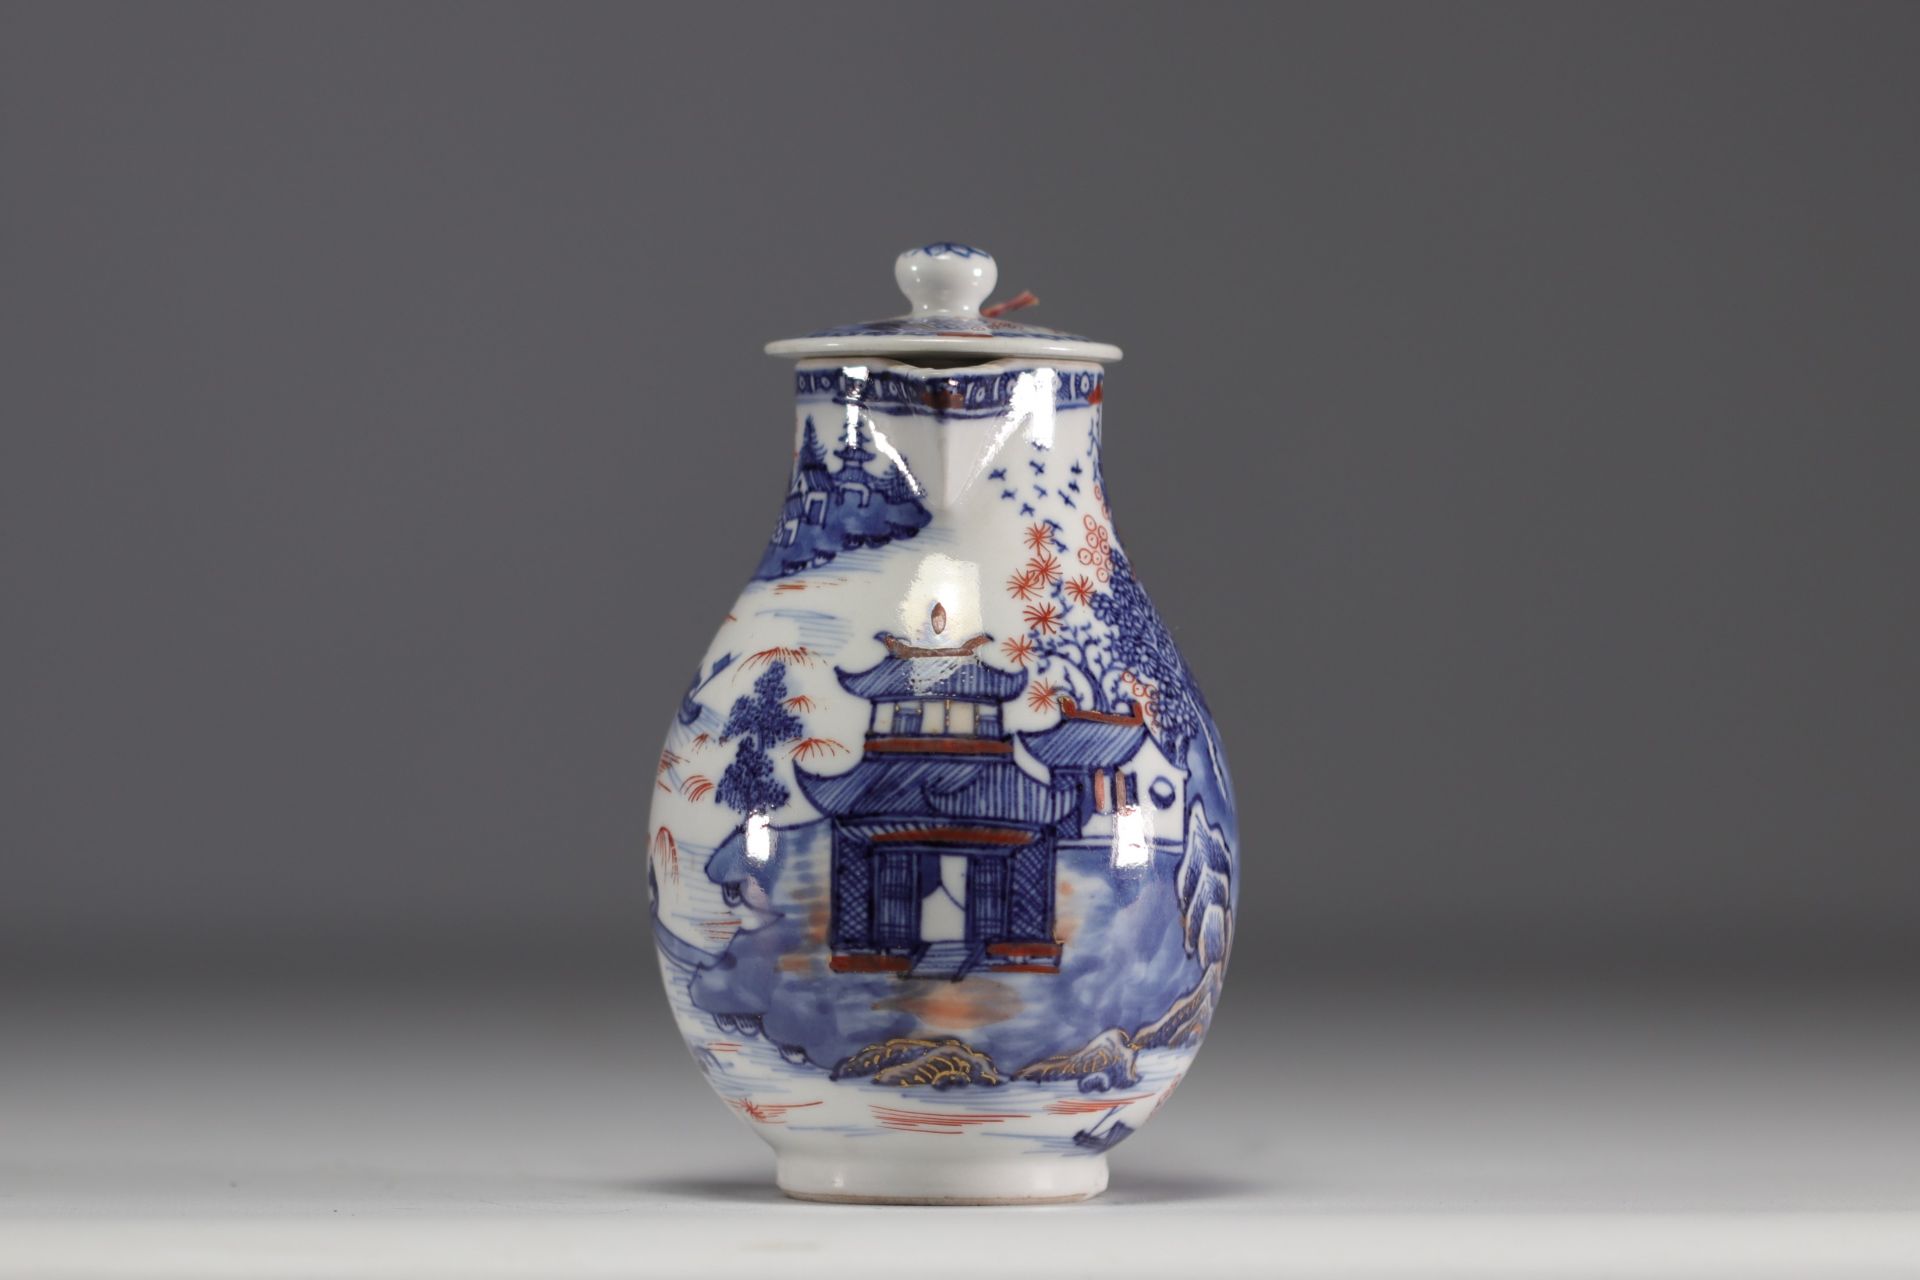 China - white, blue and red porcelain pot decorated with landscapes and figures, Qing period. - Image 3 of 5